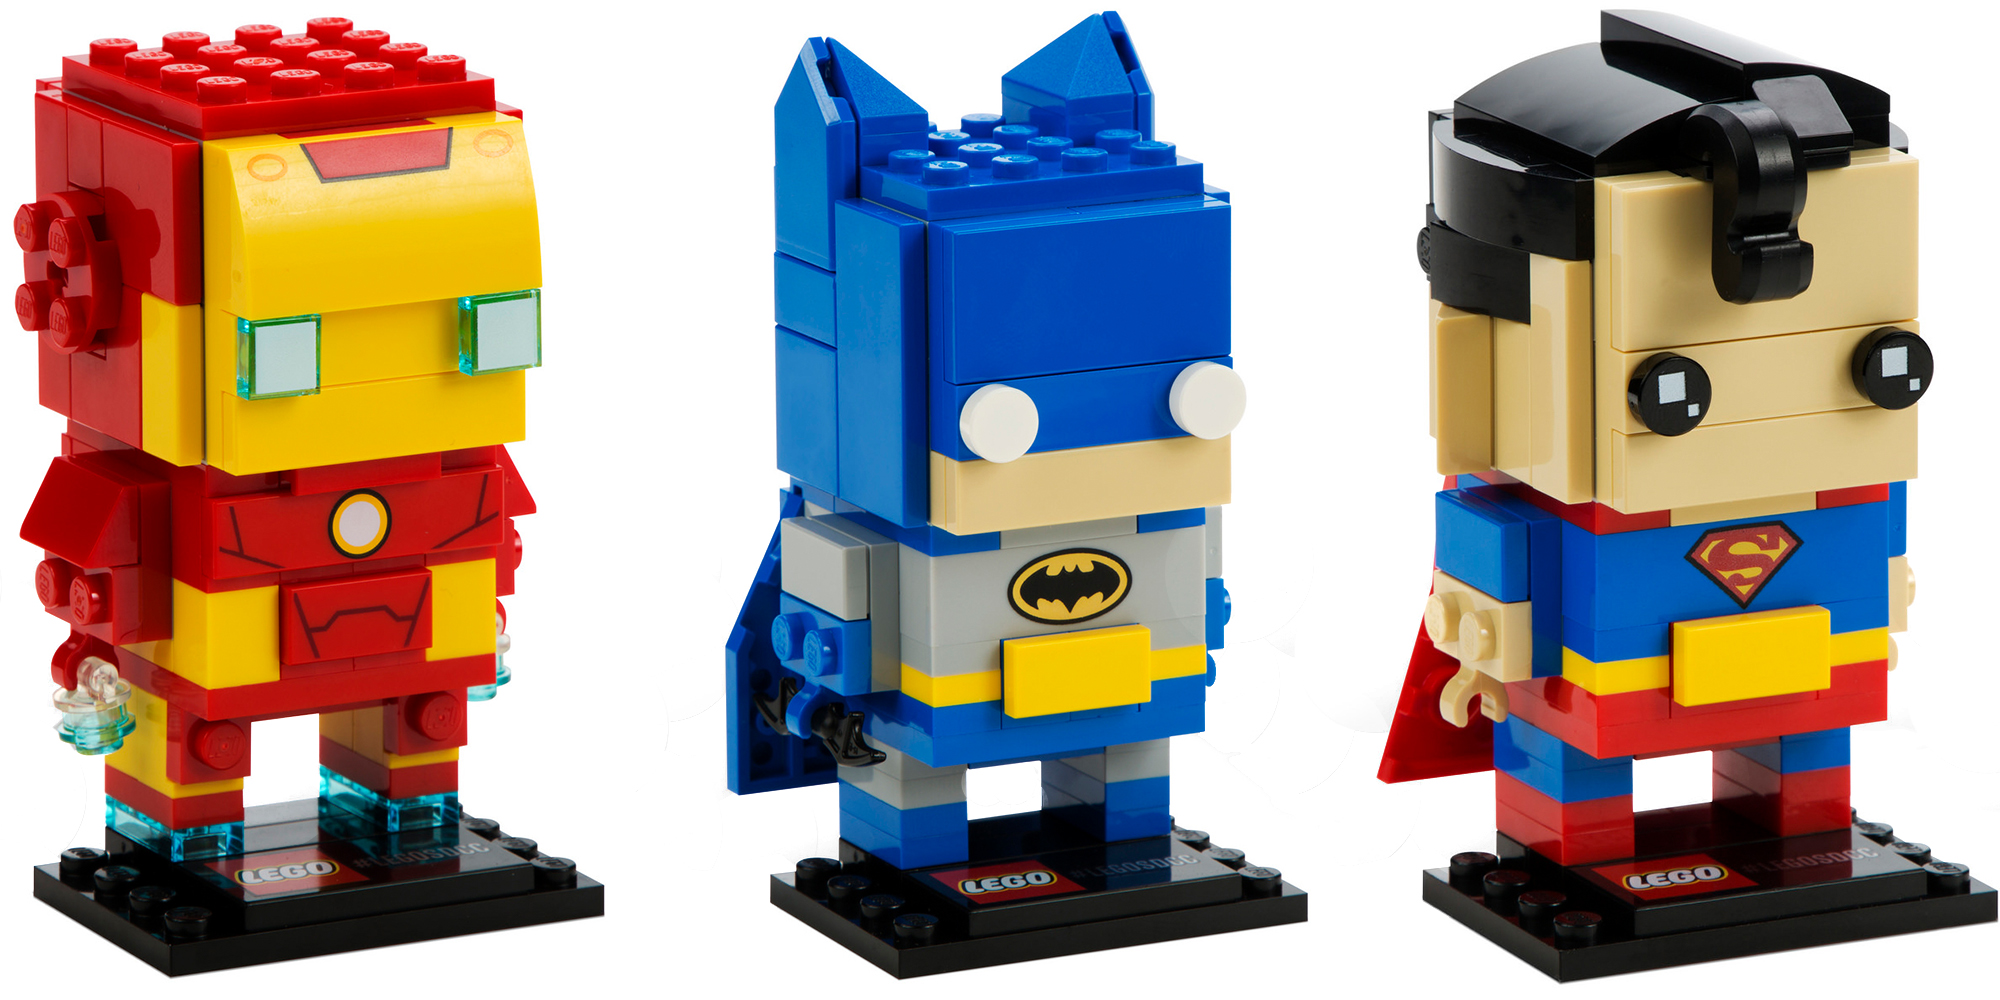 LEGO's new BrickHeadz feature your favorite Marvel and DC